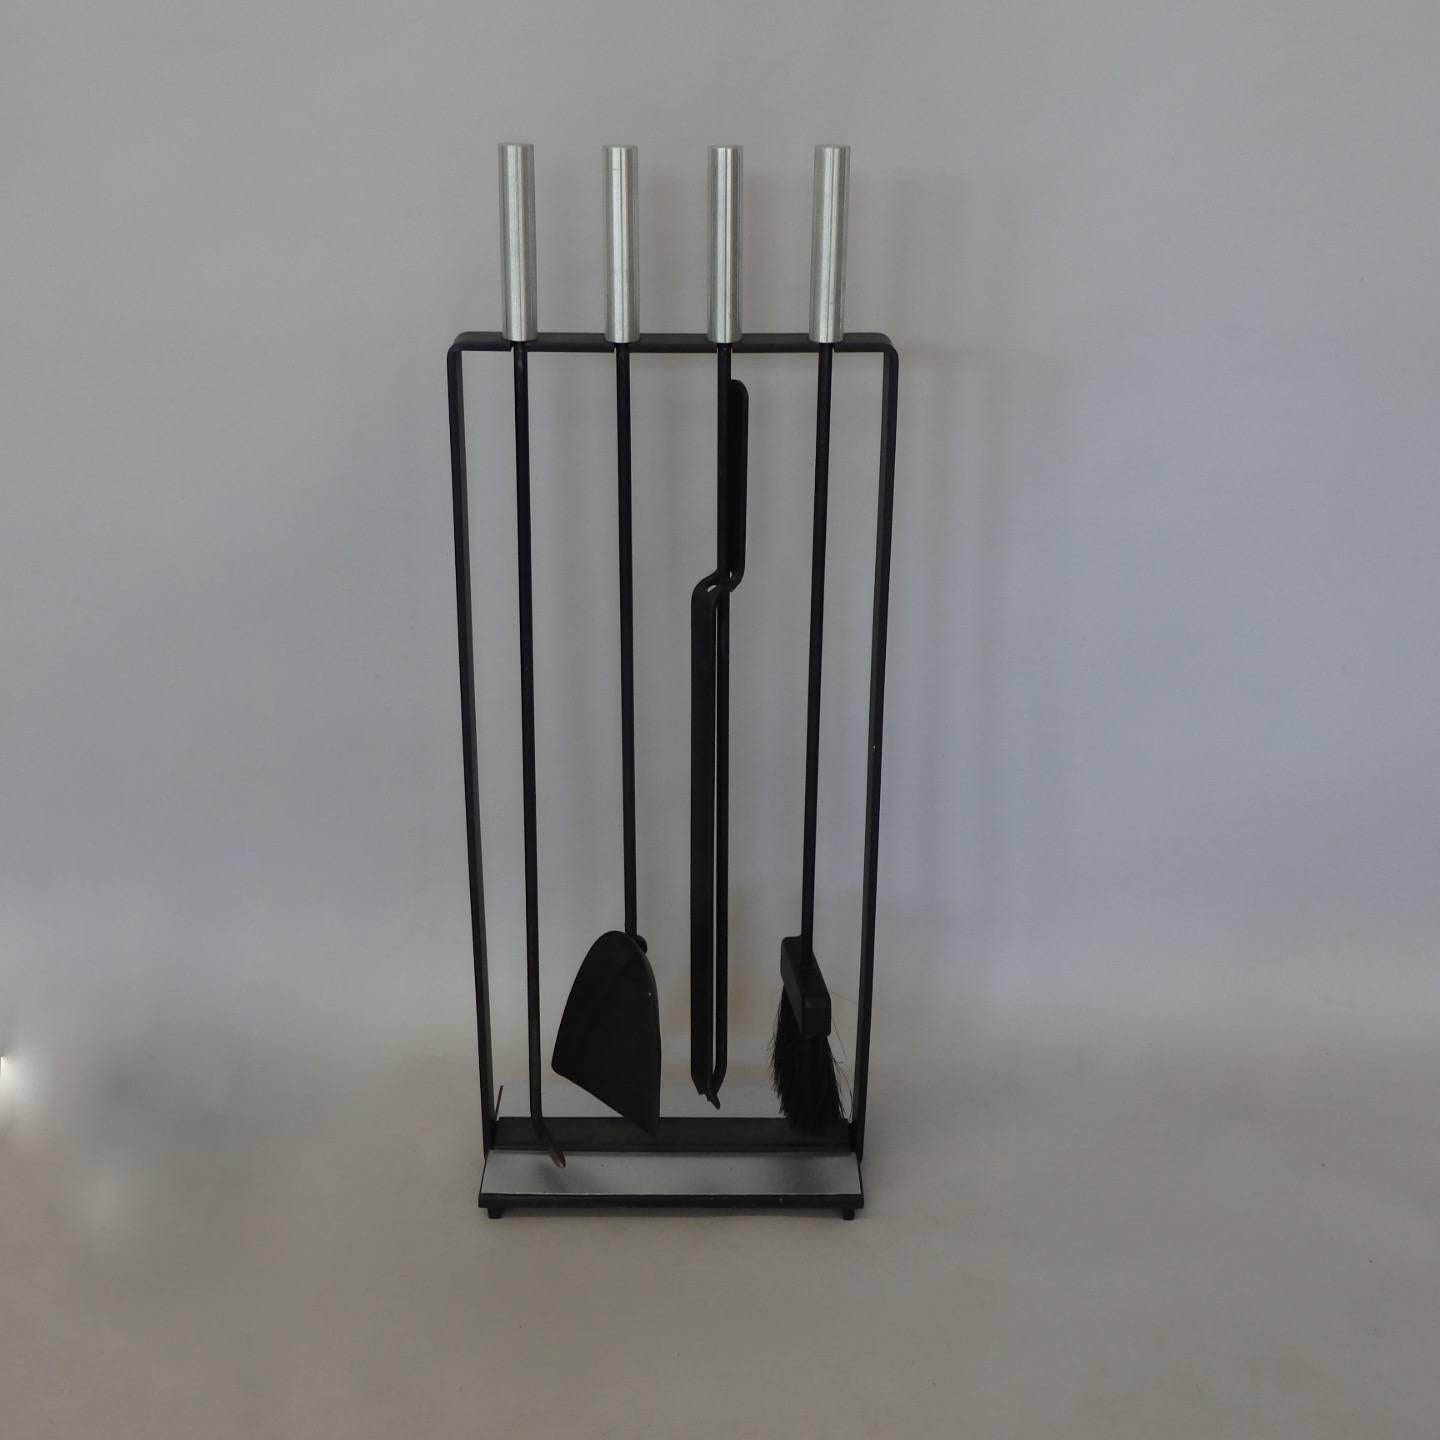 Four-piece modernist tool set in stand.